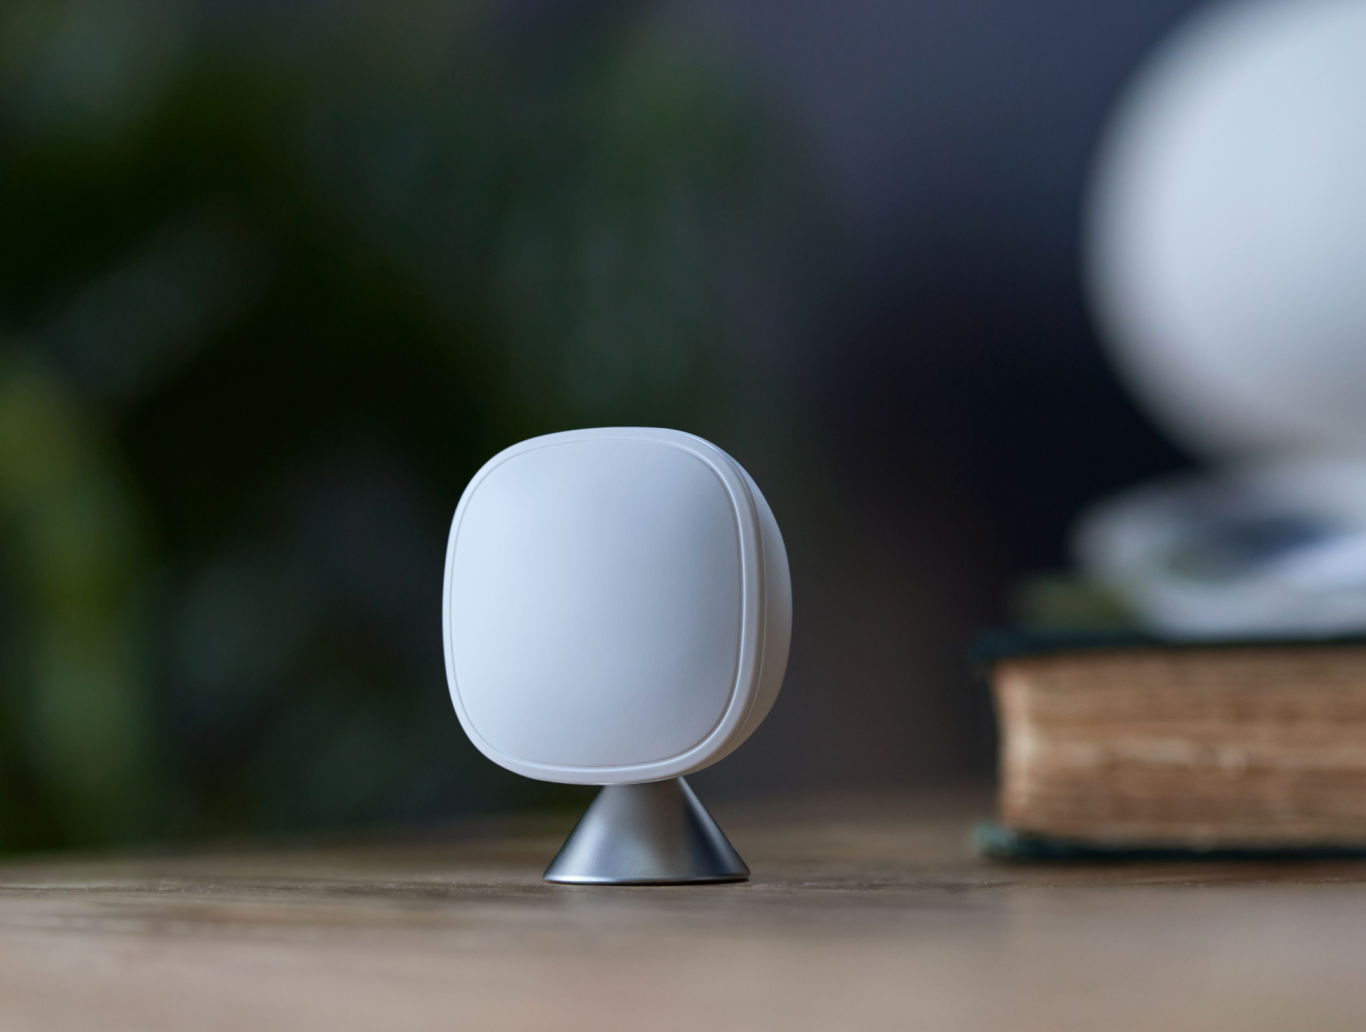 ecobee SmartSensor placed on a wooden desk with plants and a book set in the background